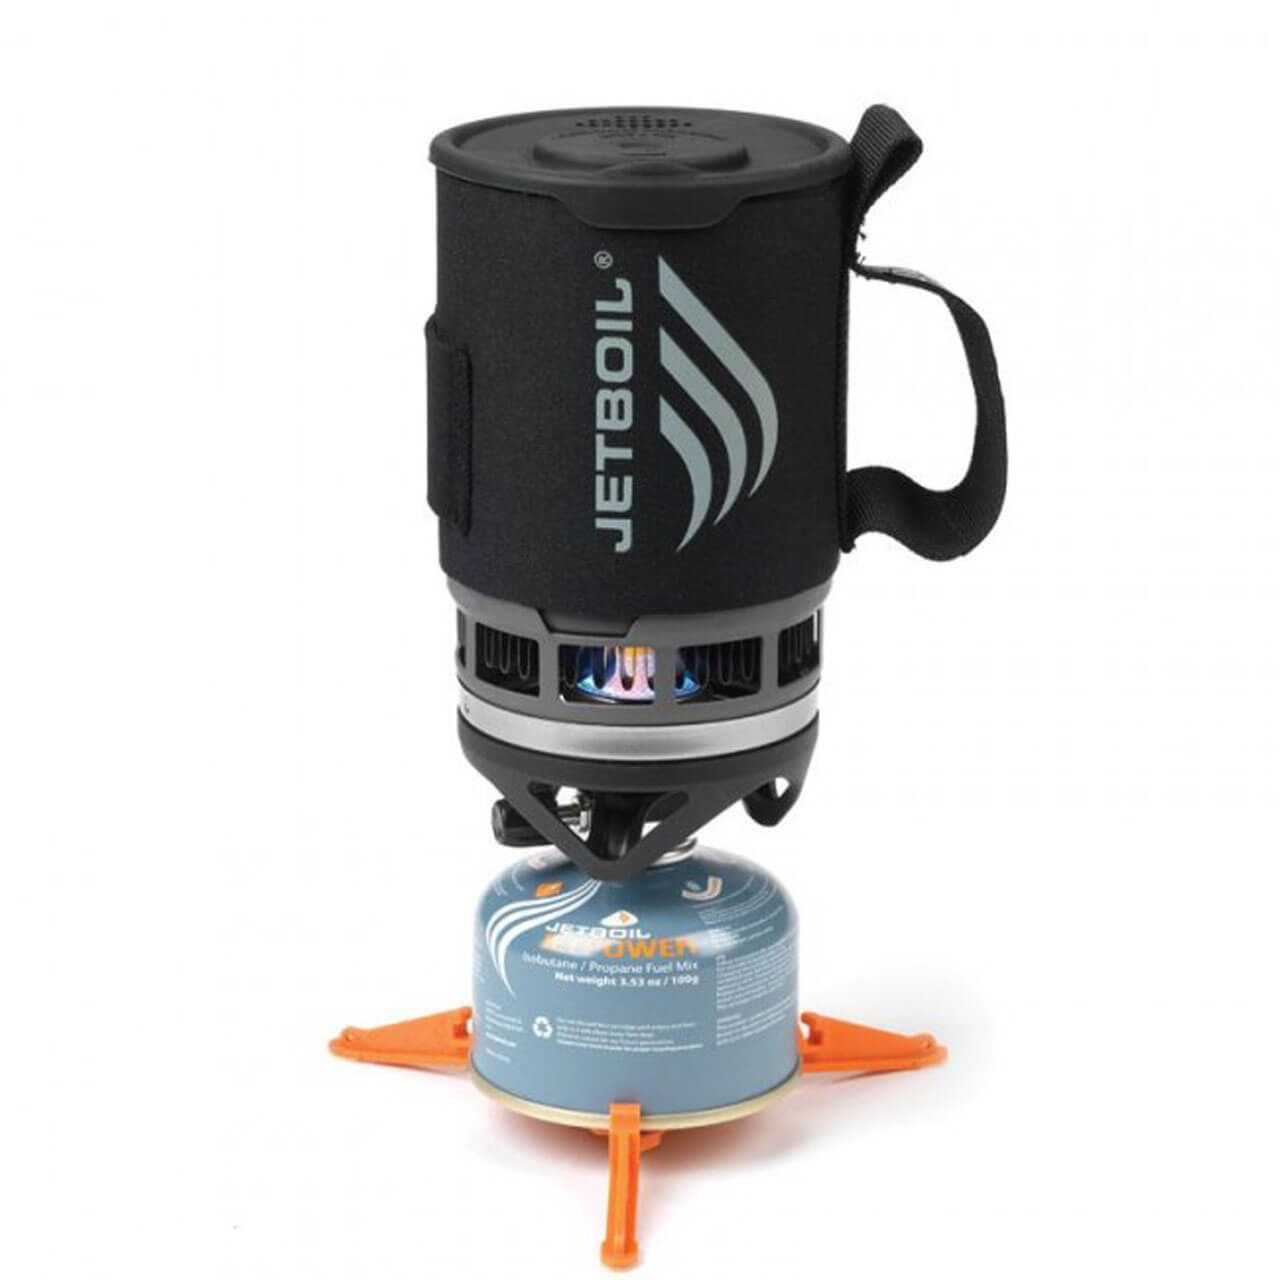 Jetboil Zip Backpacking Stove - Carbon